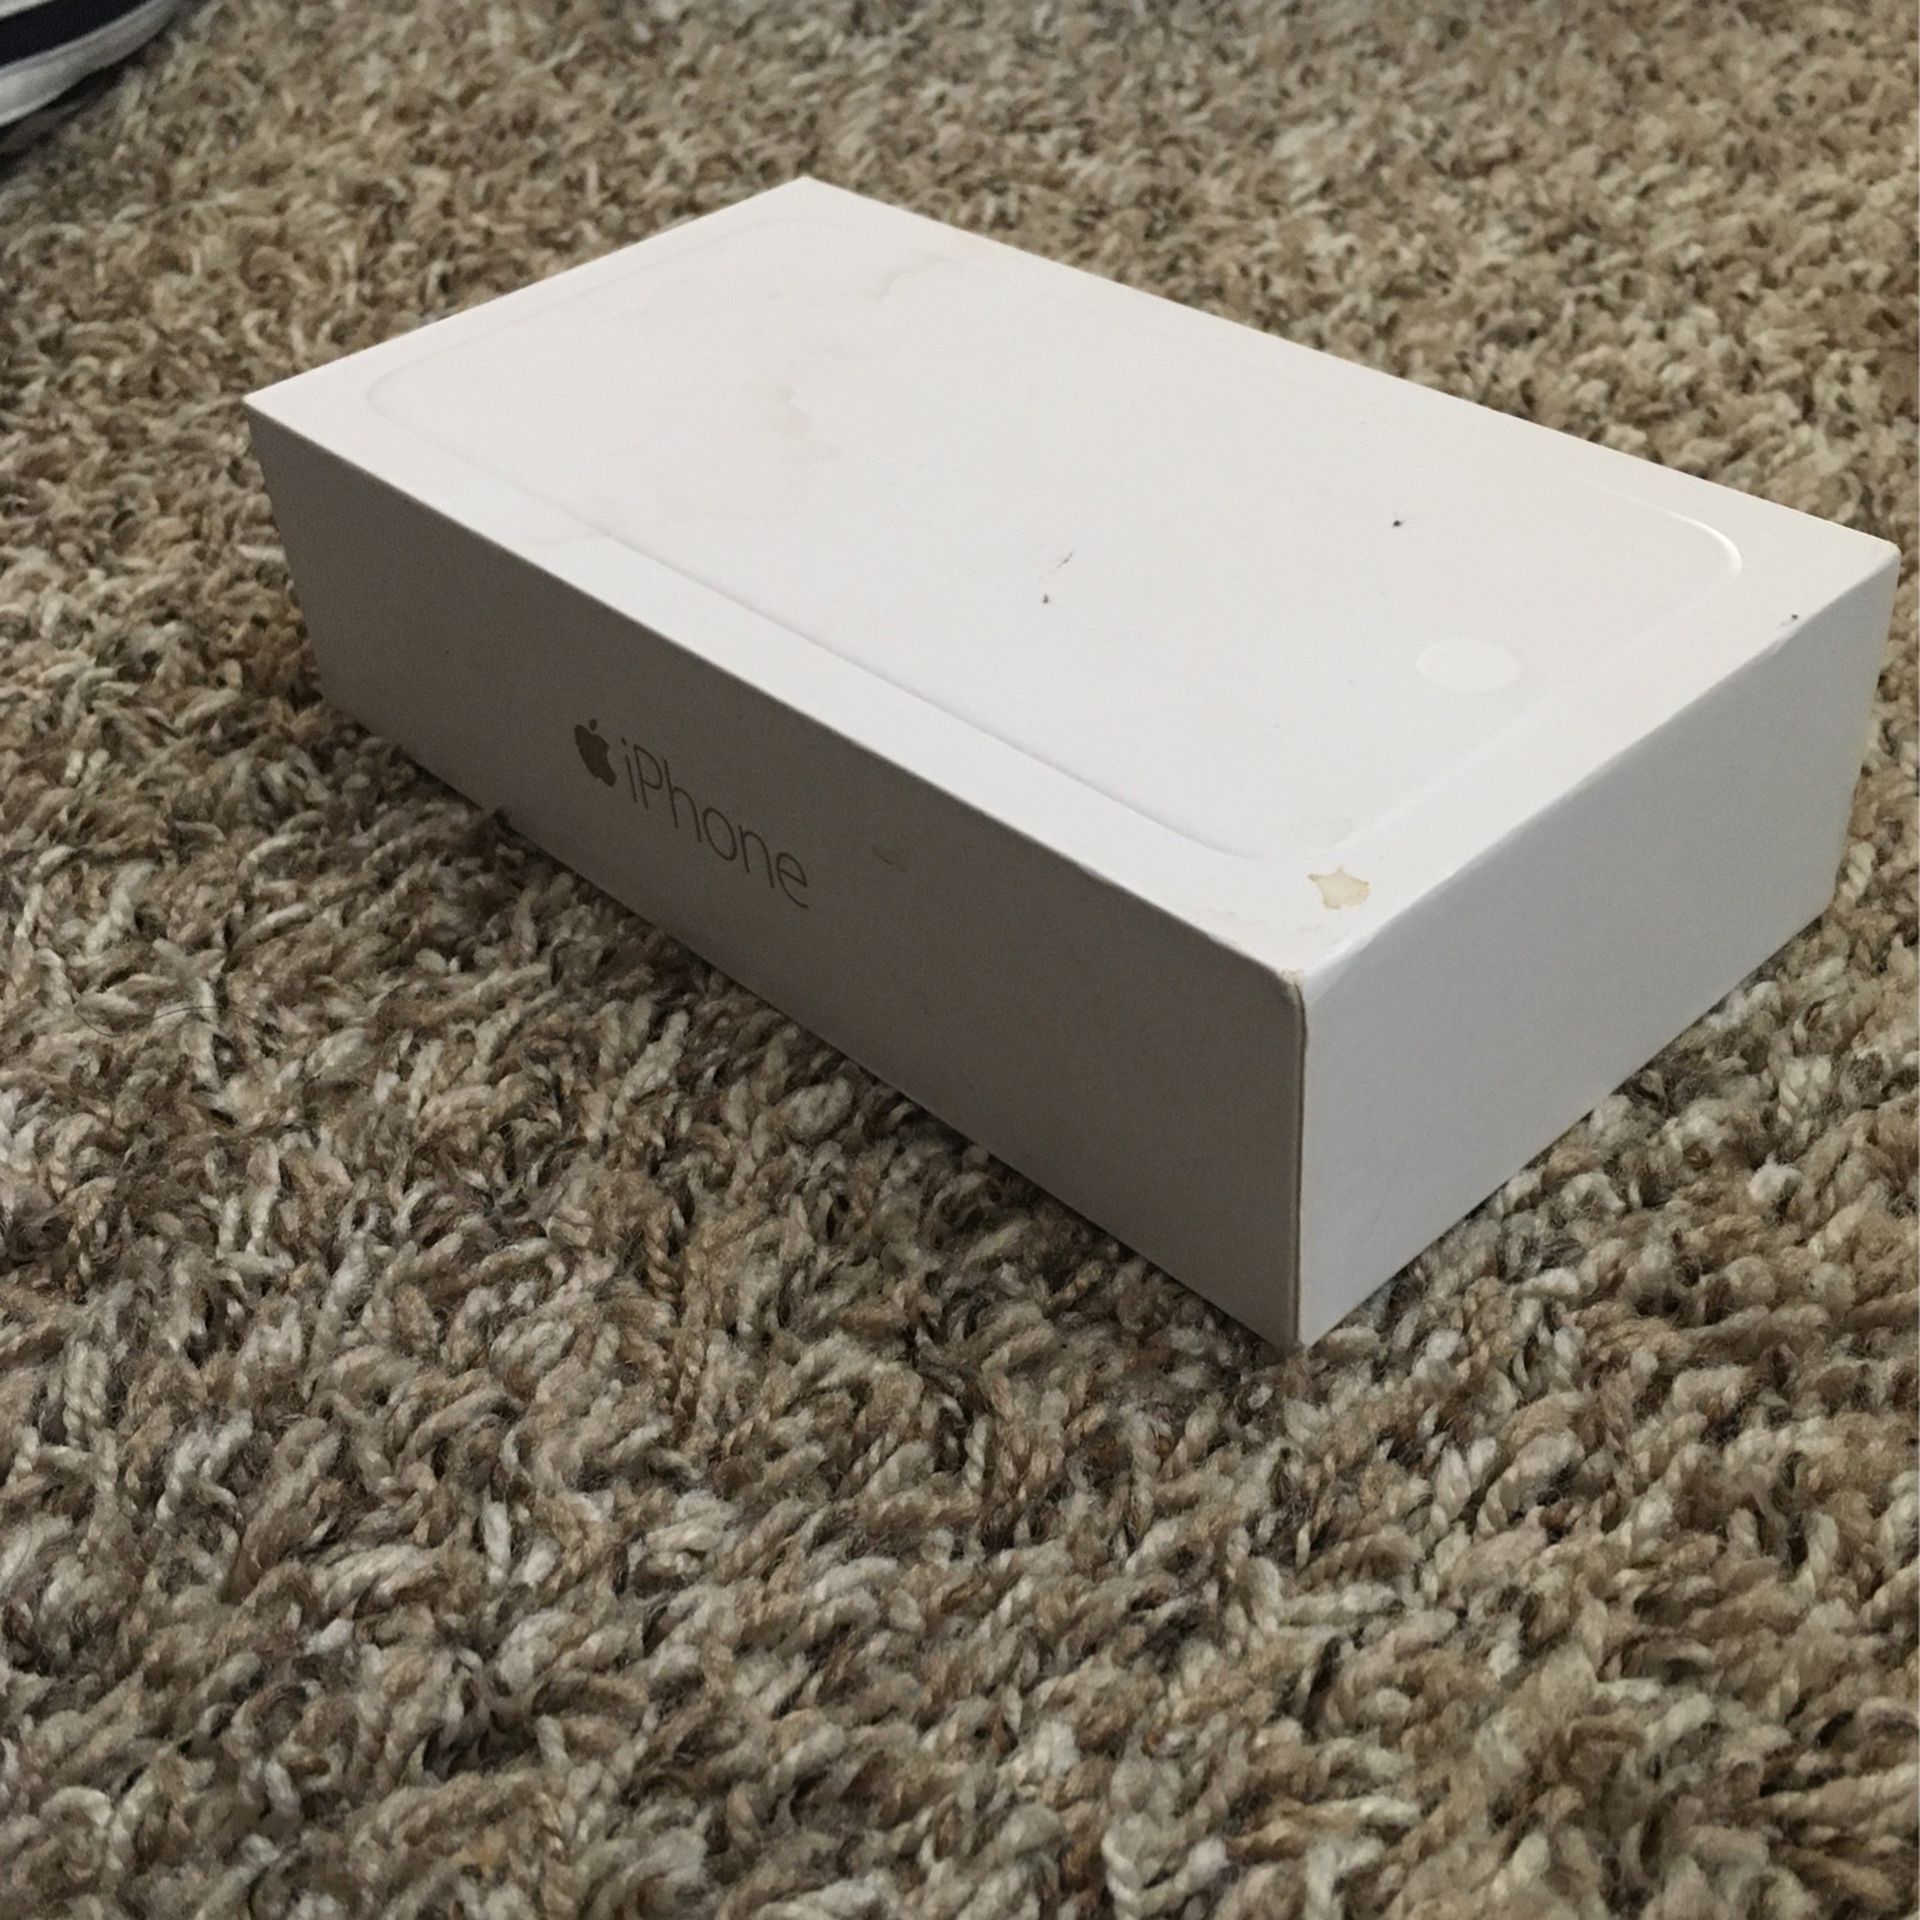 Iphone 6 & Iphone 6s Plus Box Only